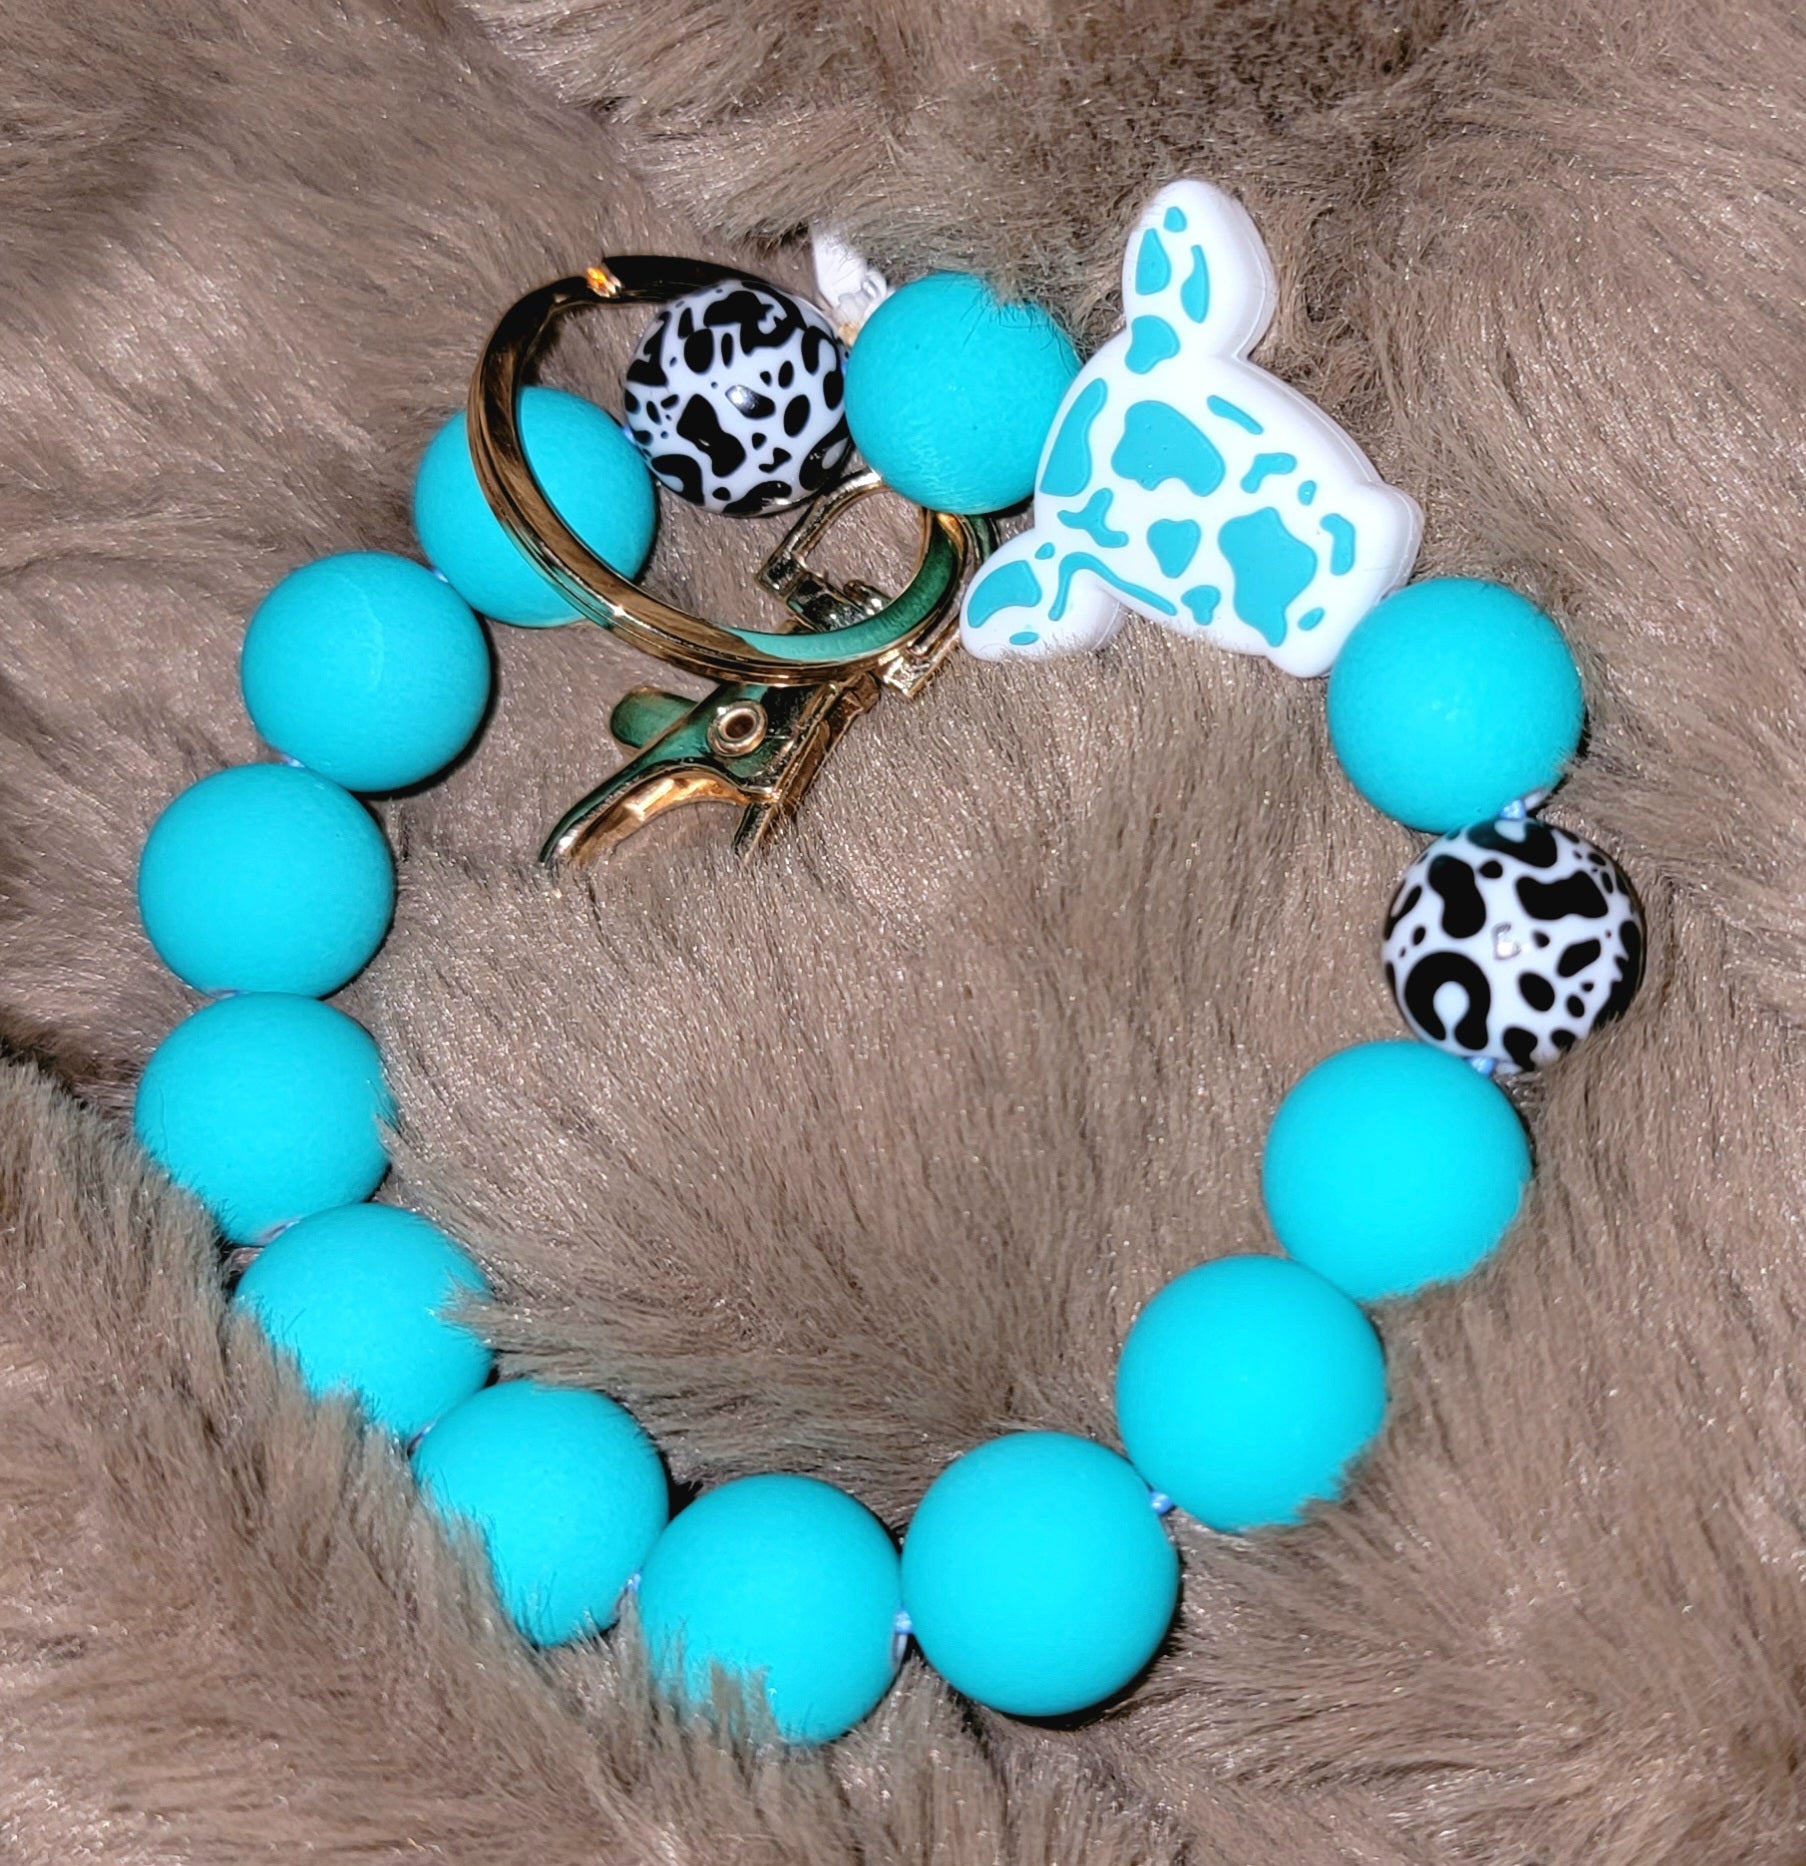 Bead Keychains Turquoise and White Cow by The Rustic Redbud Boutique | The Rustic Redbud Boutique